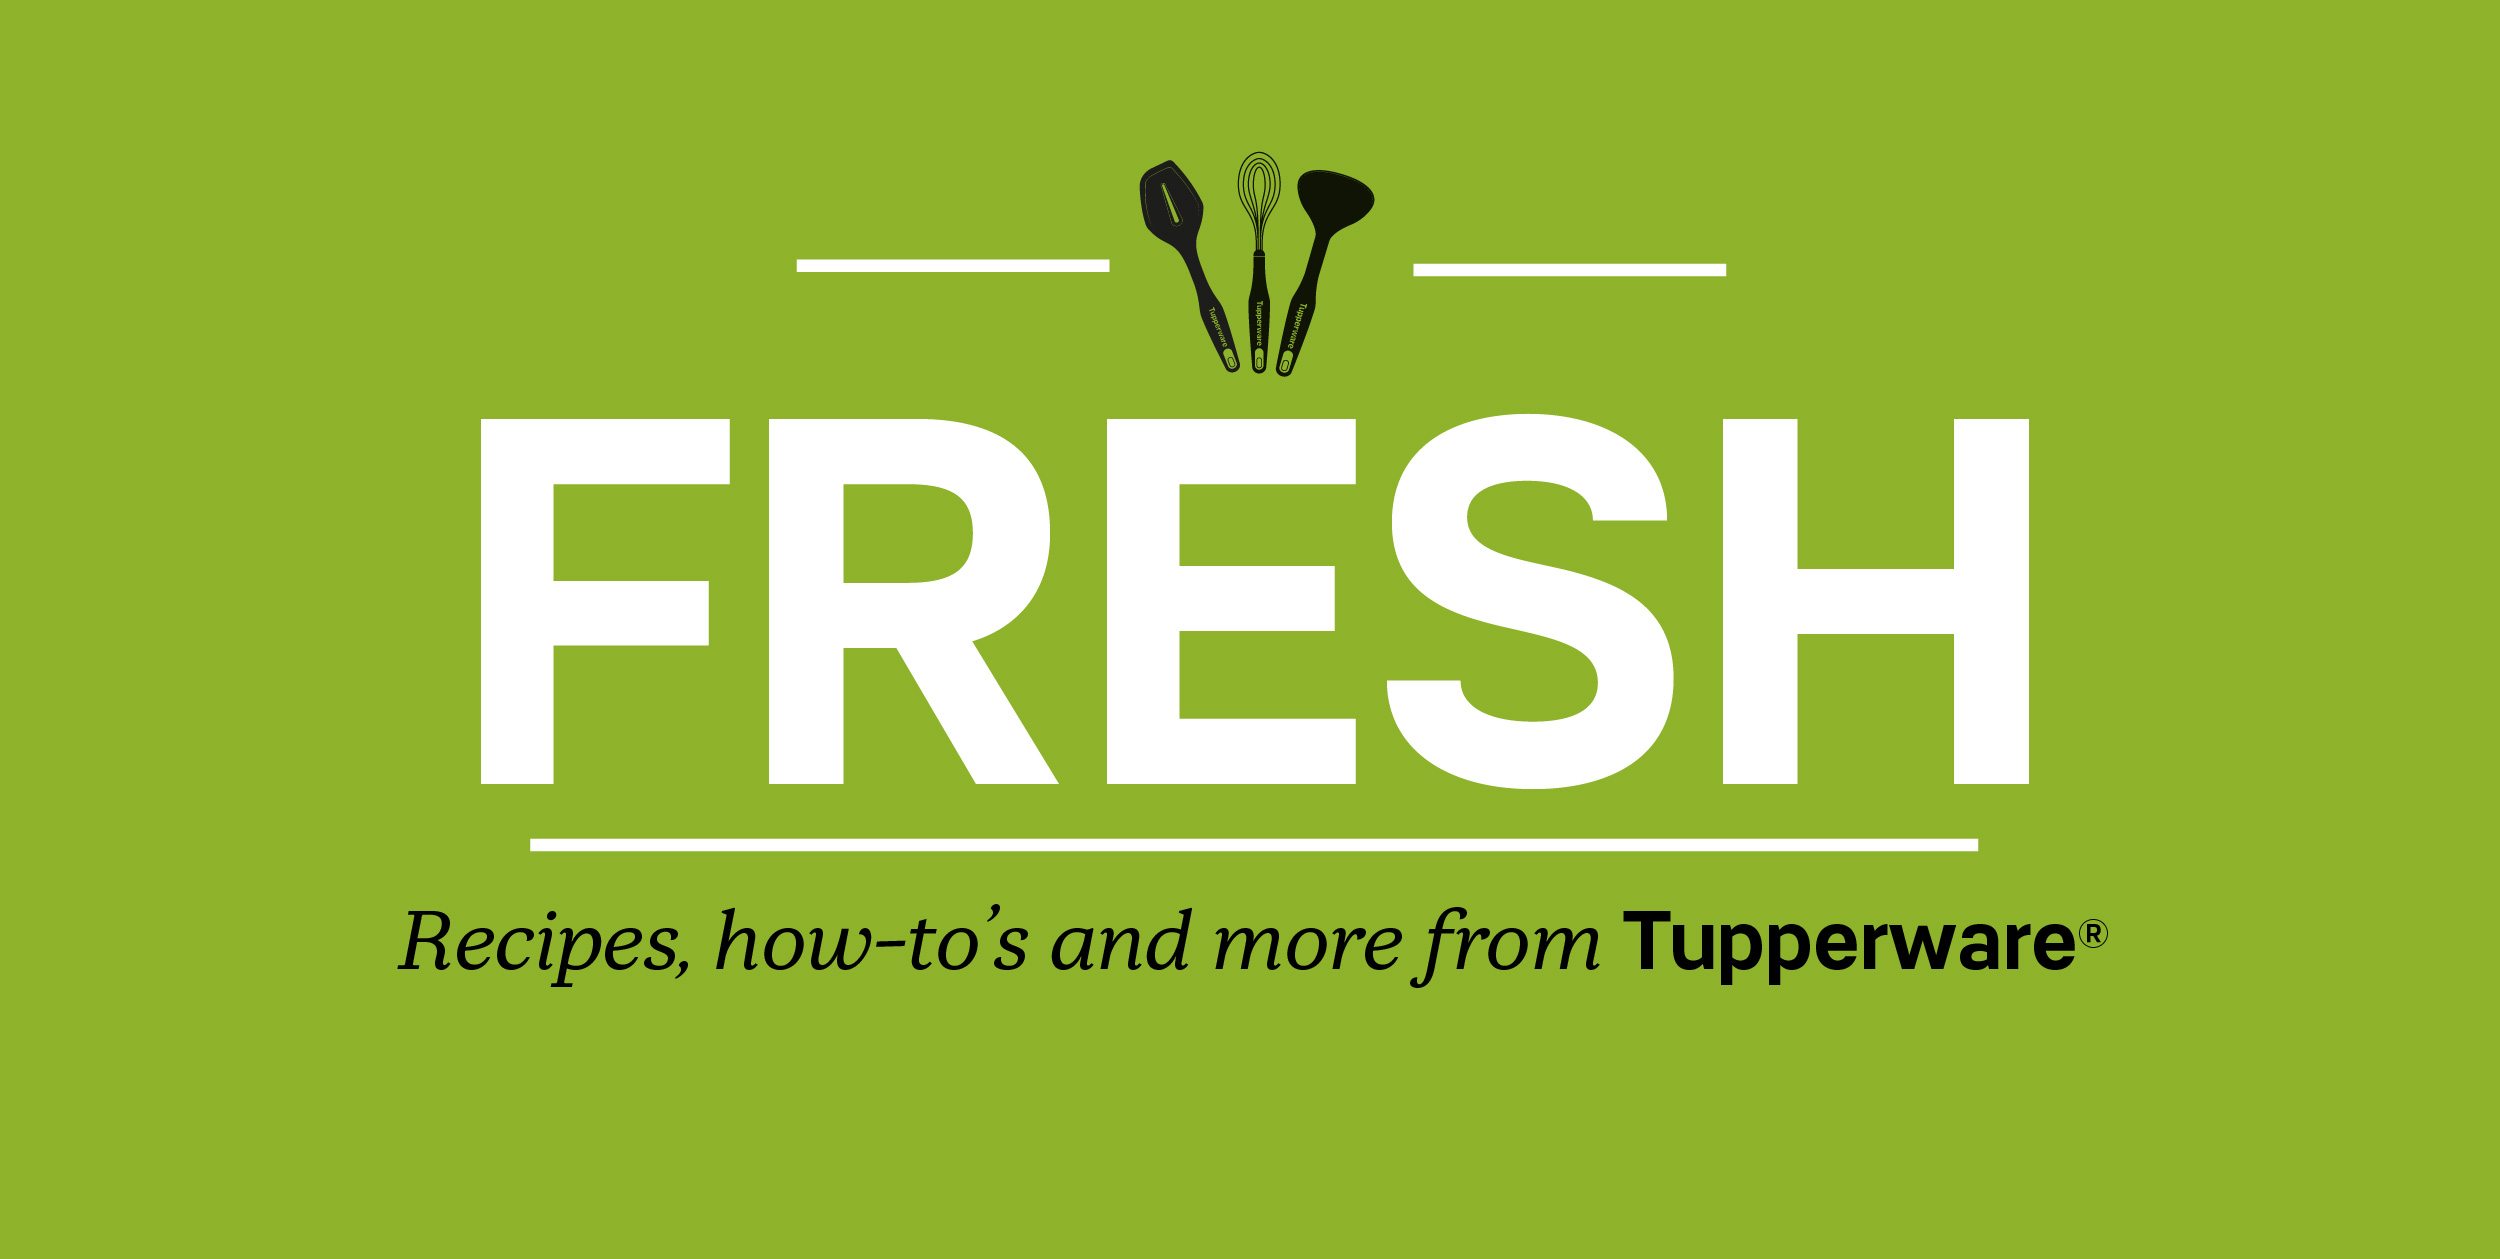 Fresh from Tupperware - Recipes, how-to's and more